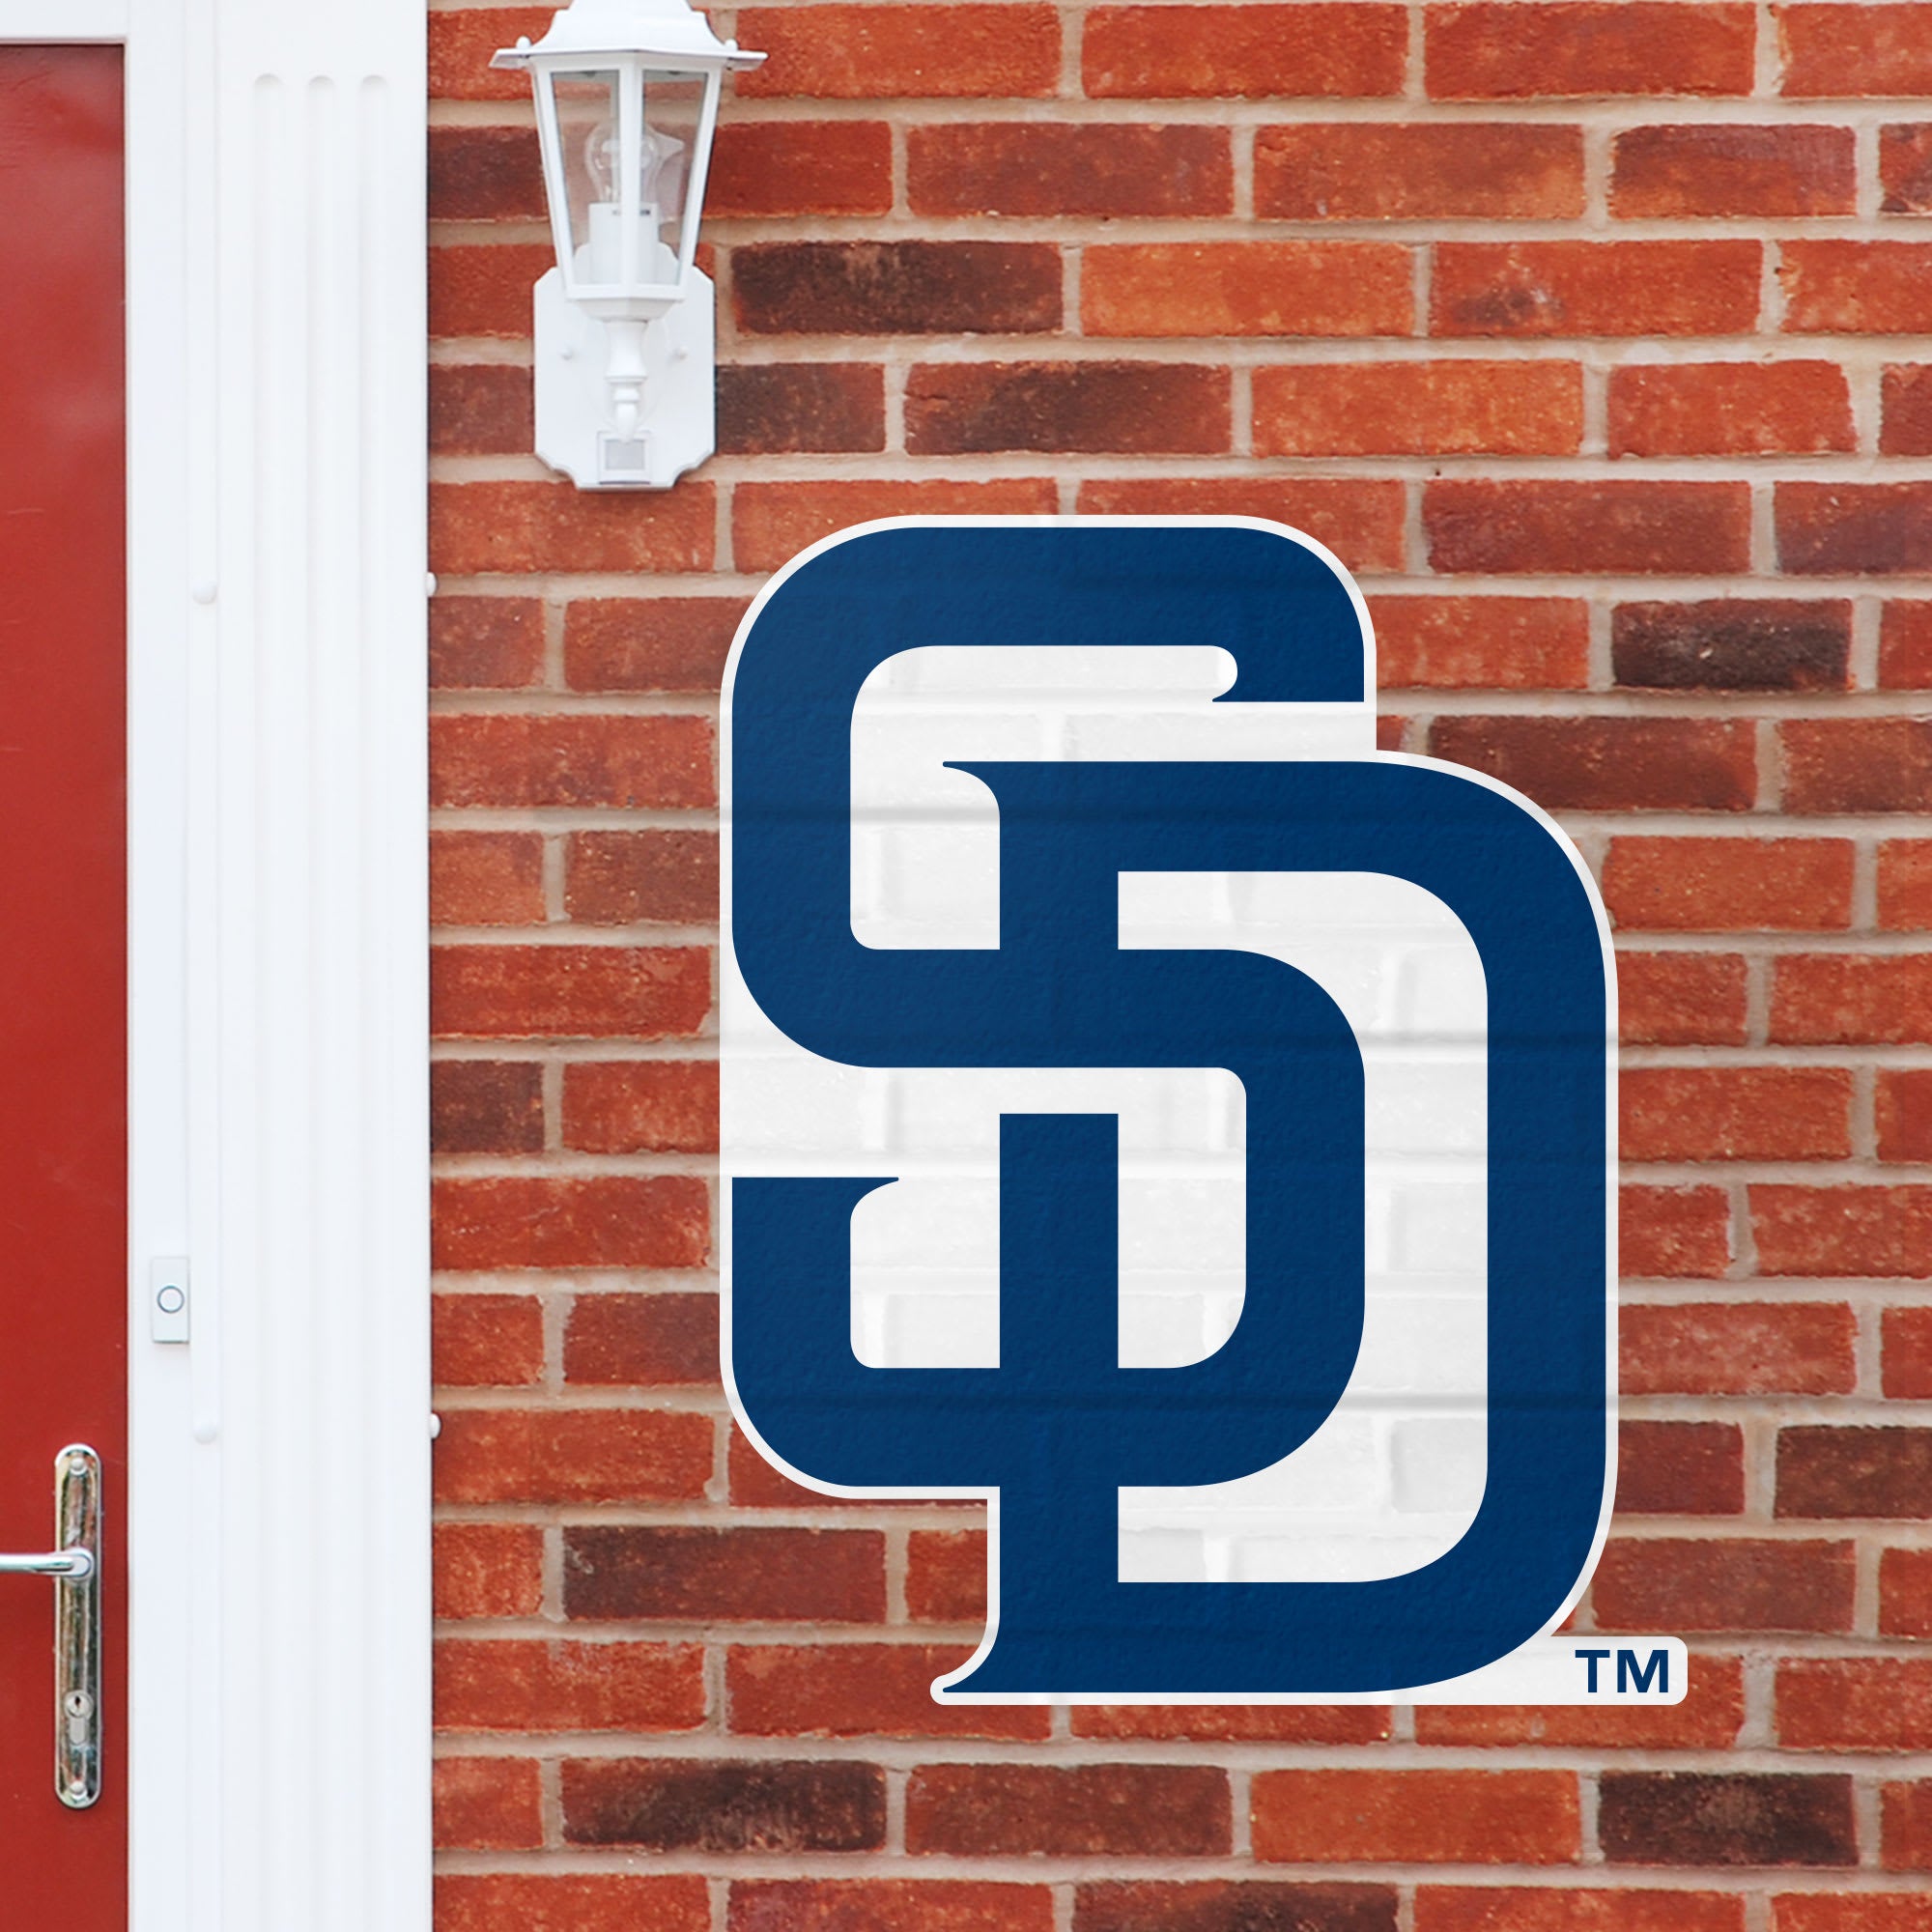 San Diego Padres: Logo - Officially Licensed MLB Outdoor Graphic Giant Logo (30"W x 30"H) by Fathead | Wood/Aluminum